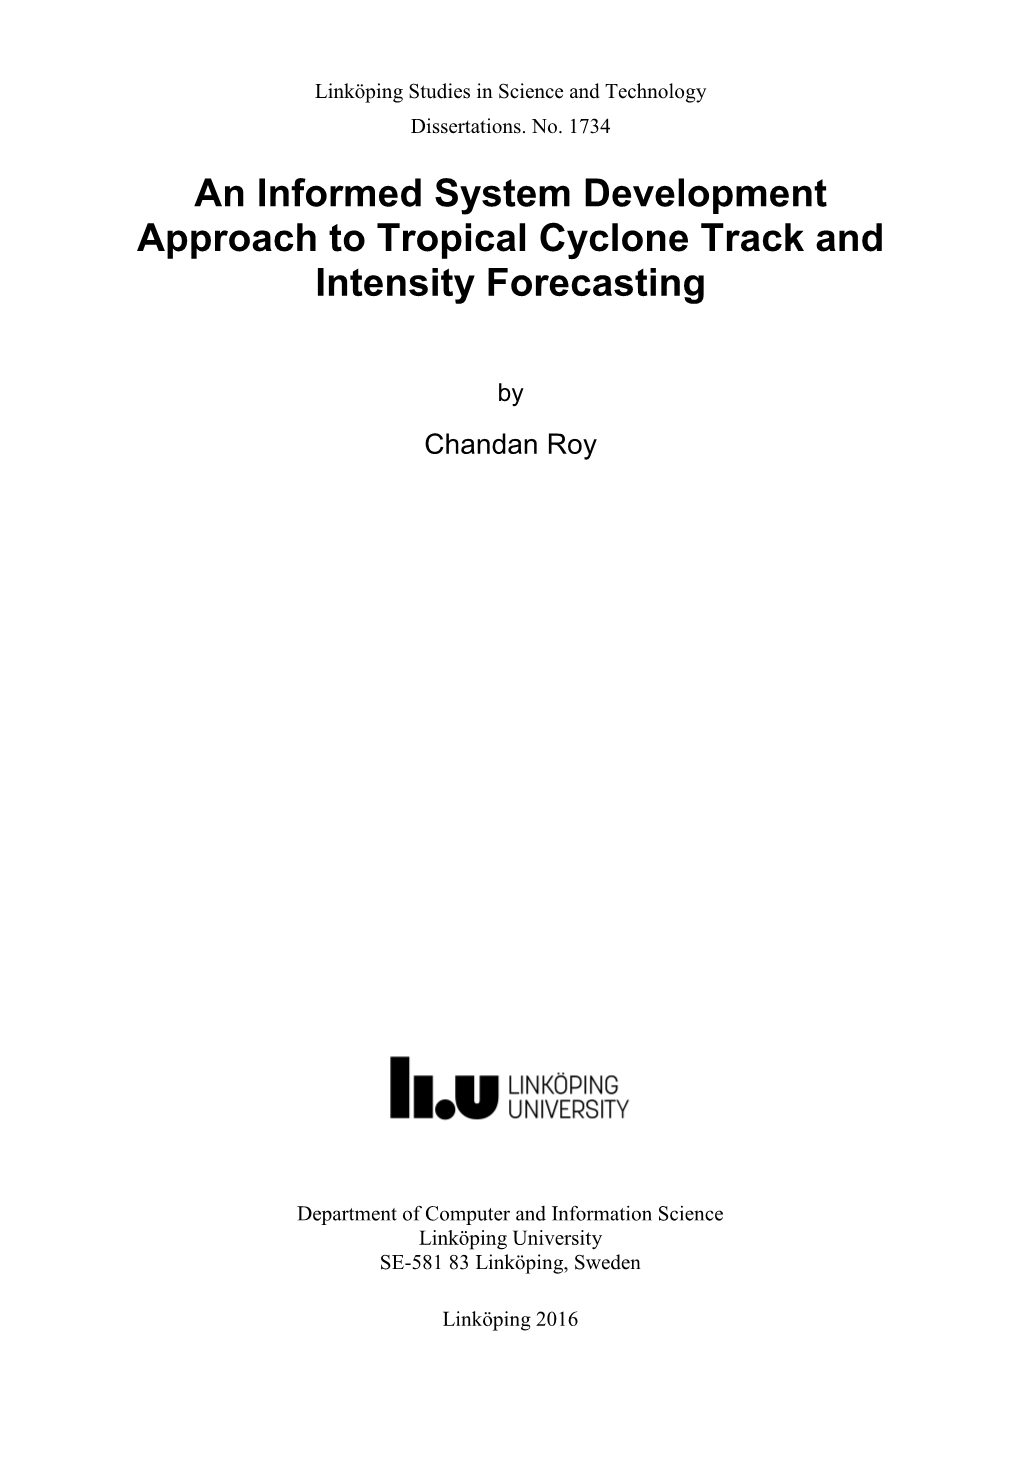 An Informed System Development Approach to Tropical Cyclone Track and Intensity Forecasting